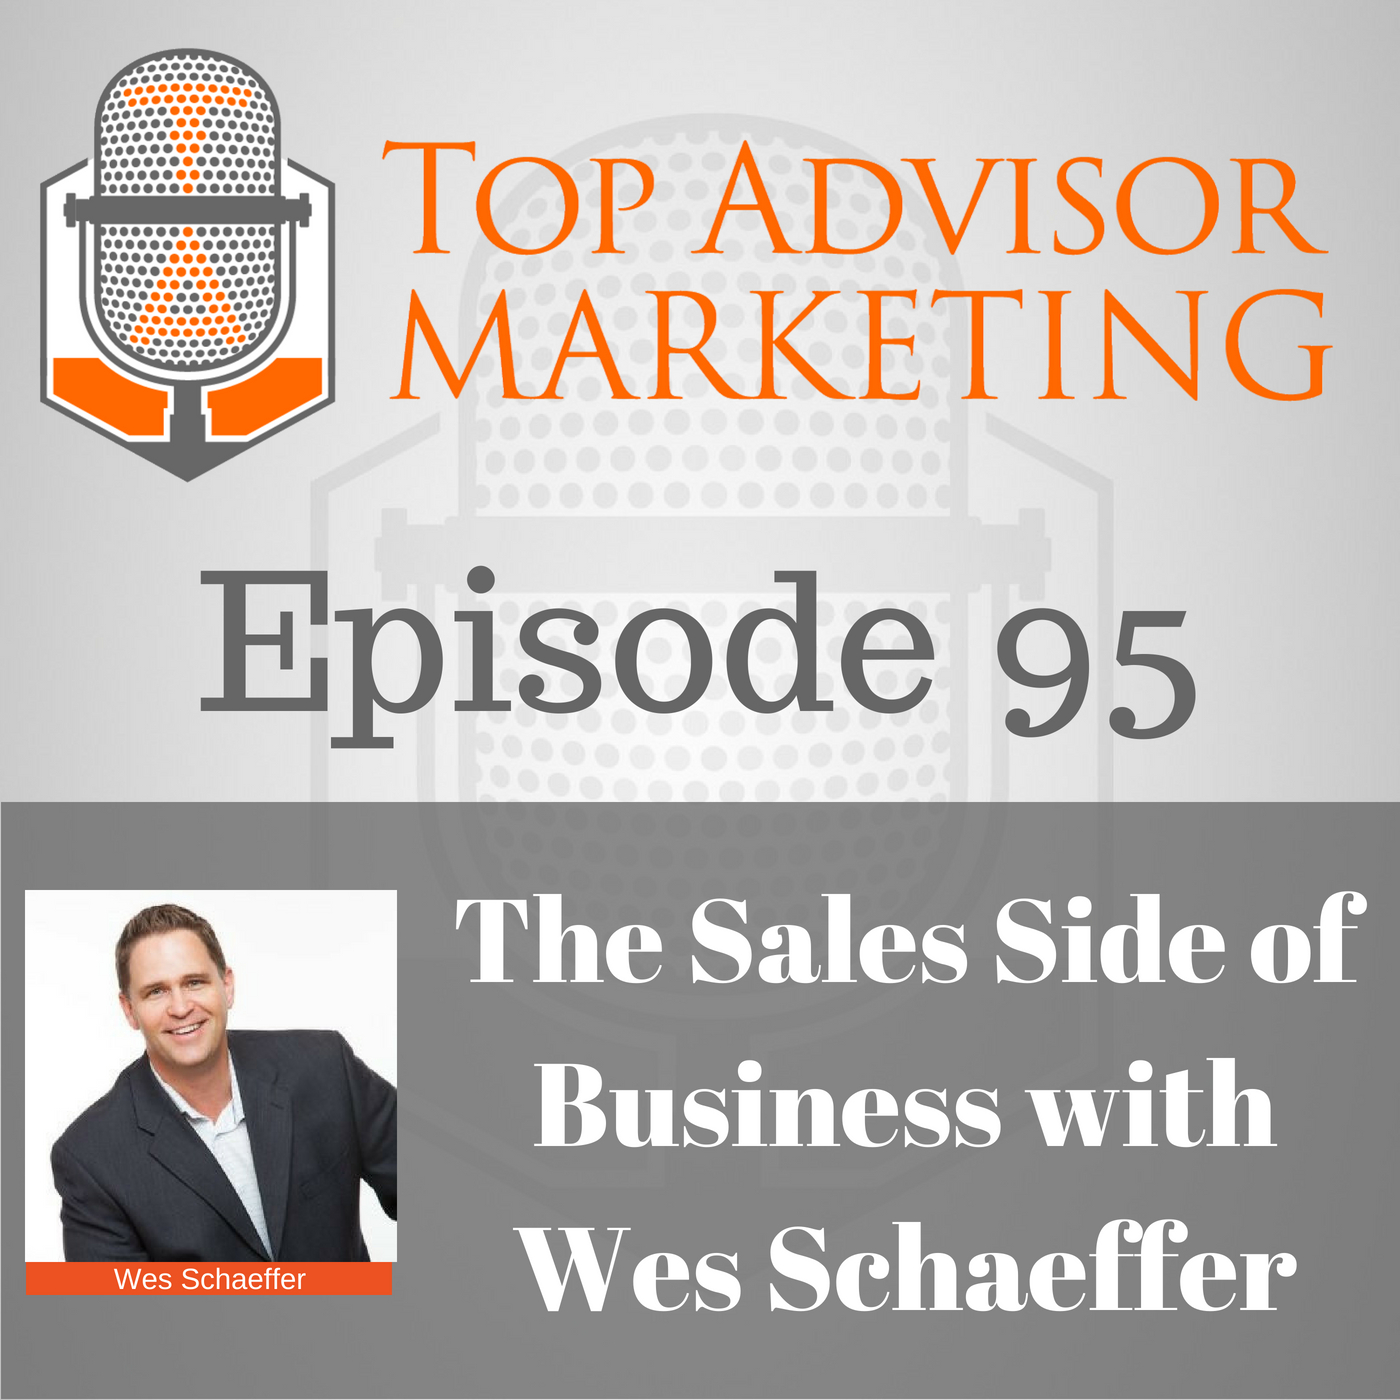 Episode 95 - The Sales Side of Business with Wes Schaeffer